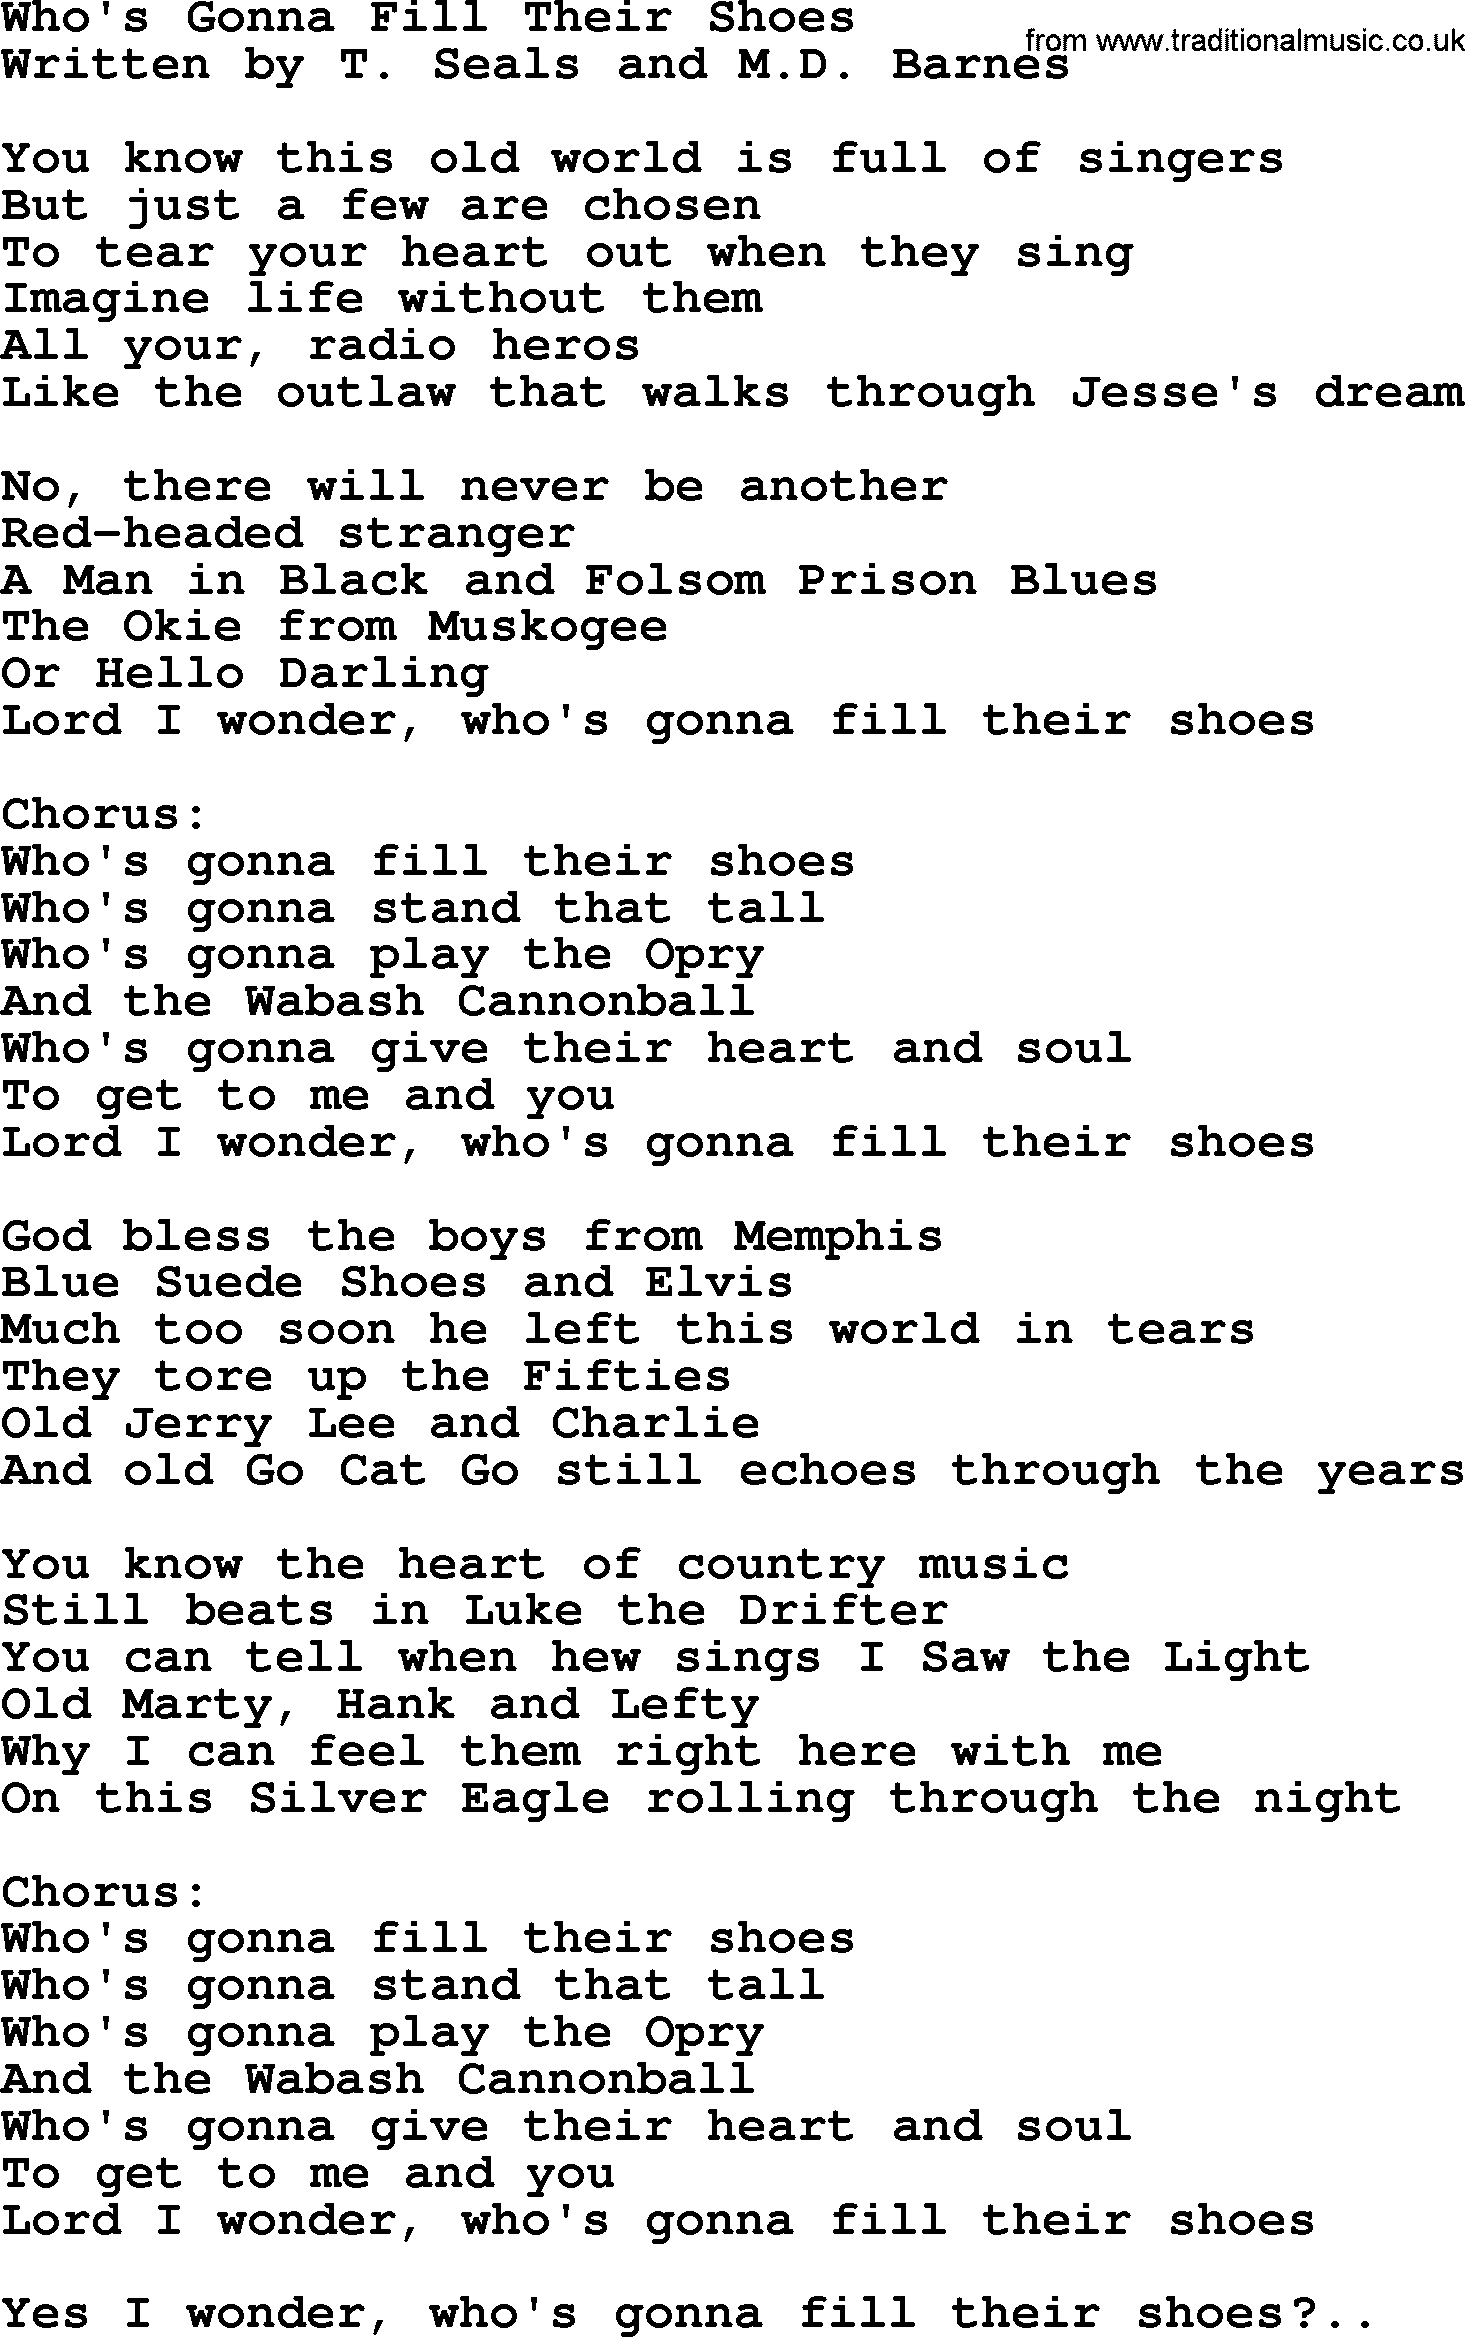 George Jones song: Who's Gonna Fill Their Shoes, lyrics